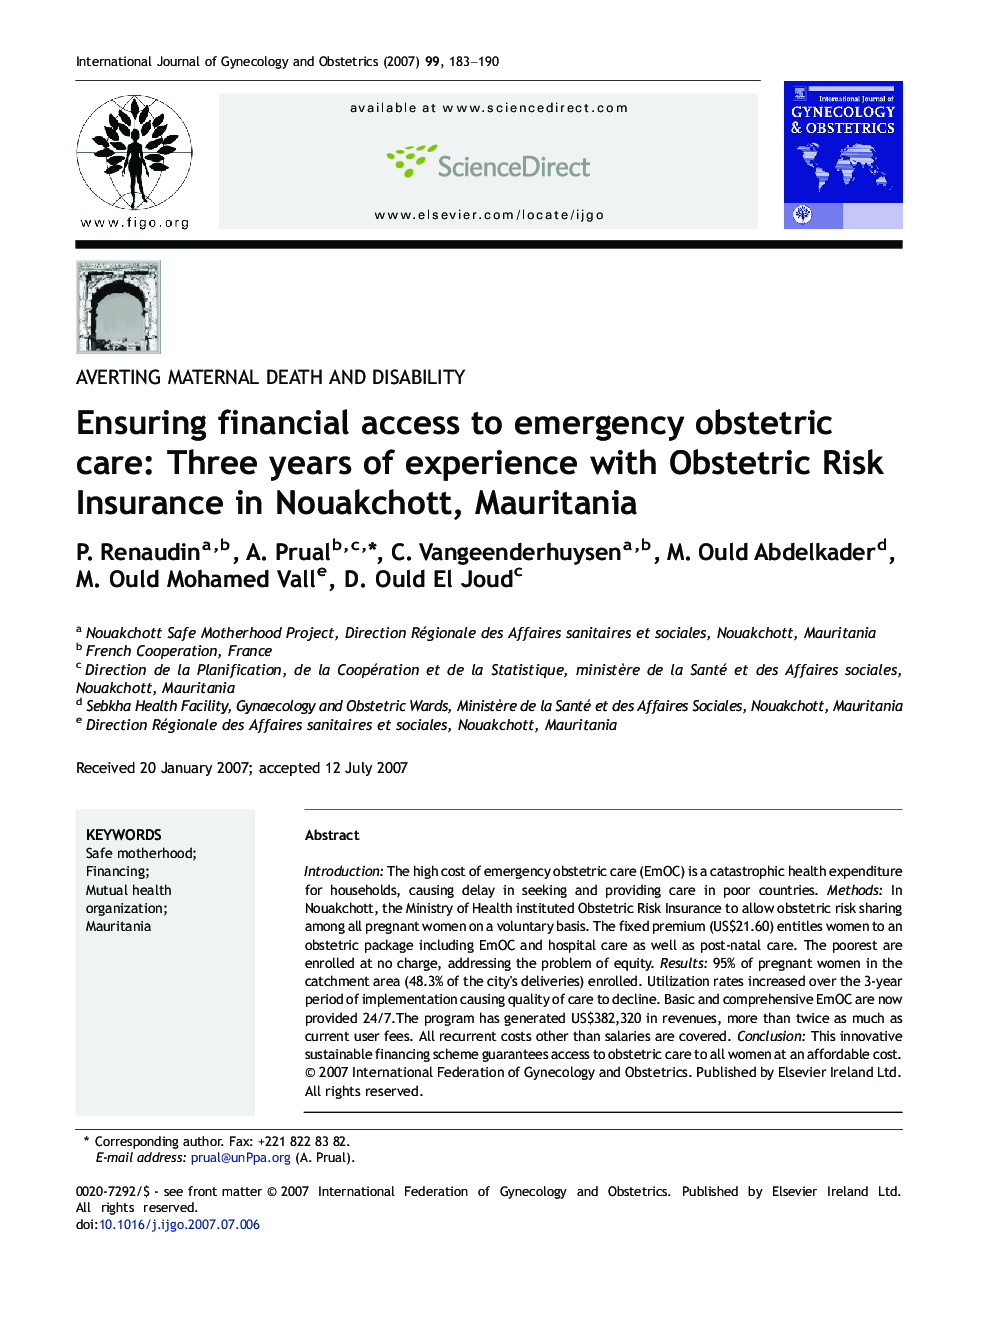 Ensuring financial access to emergency obstetric care: Three years of experience with Obstetric Risk Insurance in Nouakchott, Mauritania